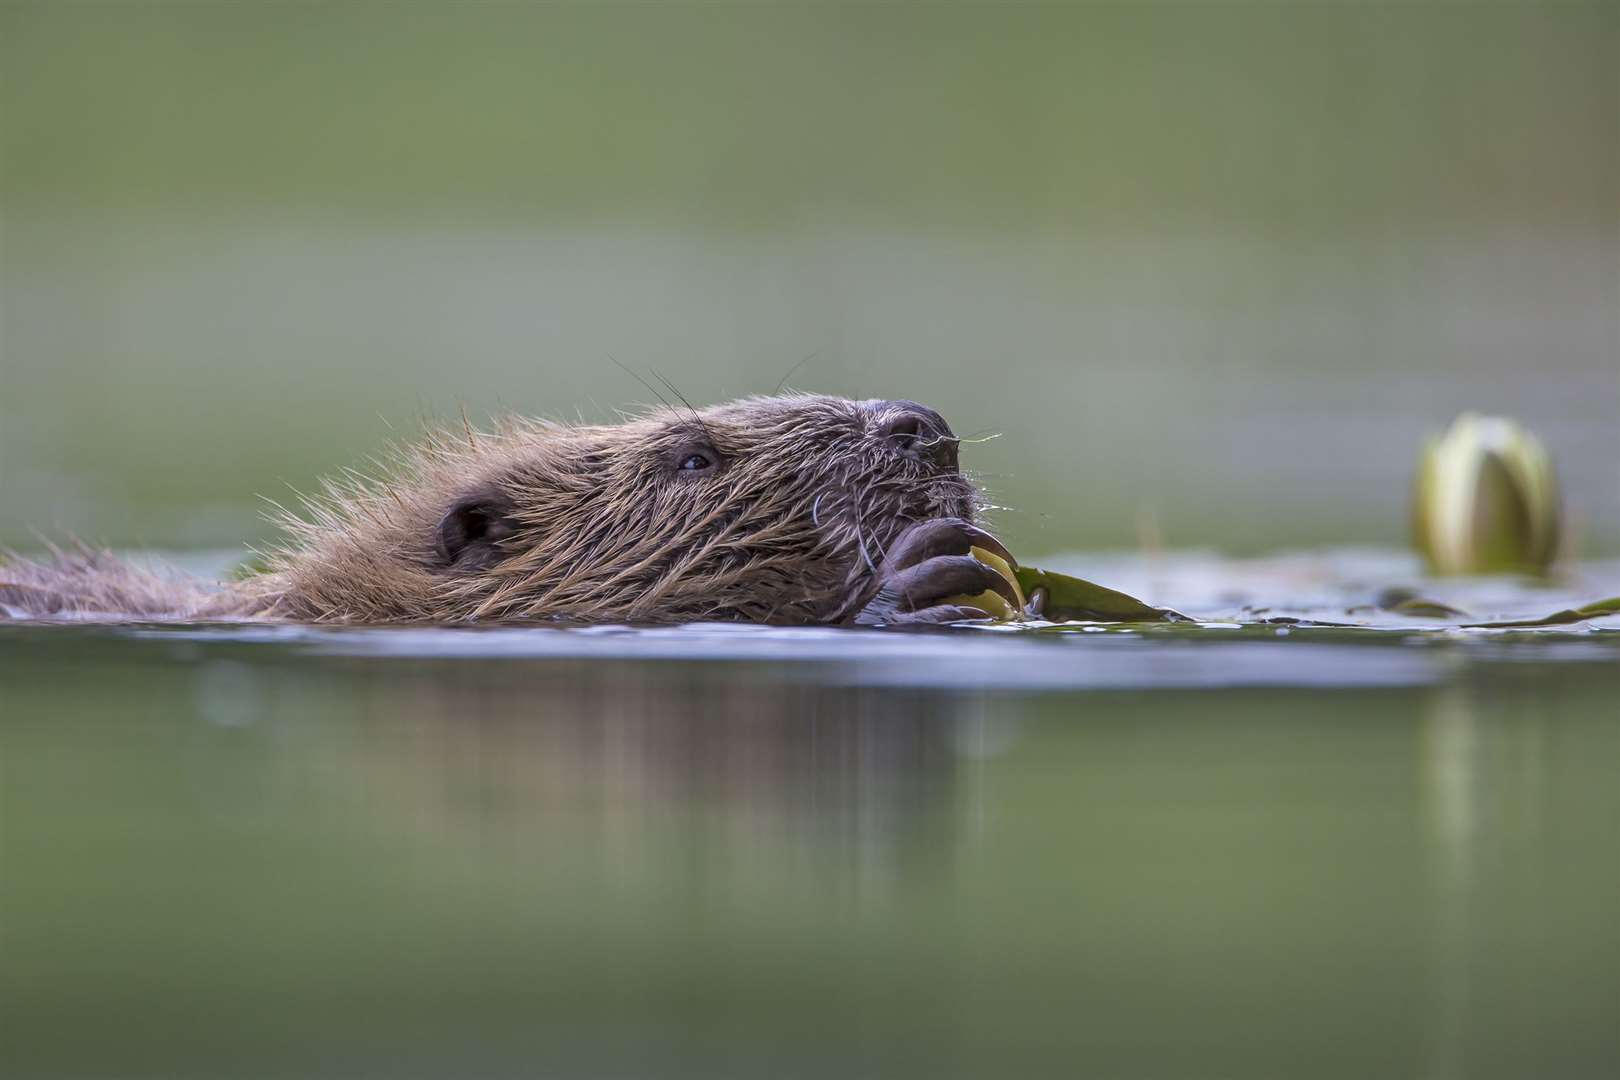 What do you think about beavers returning to local rivers?